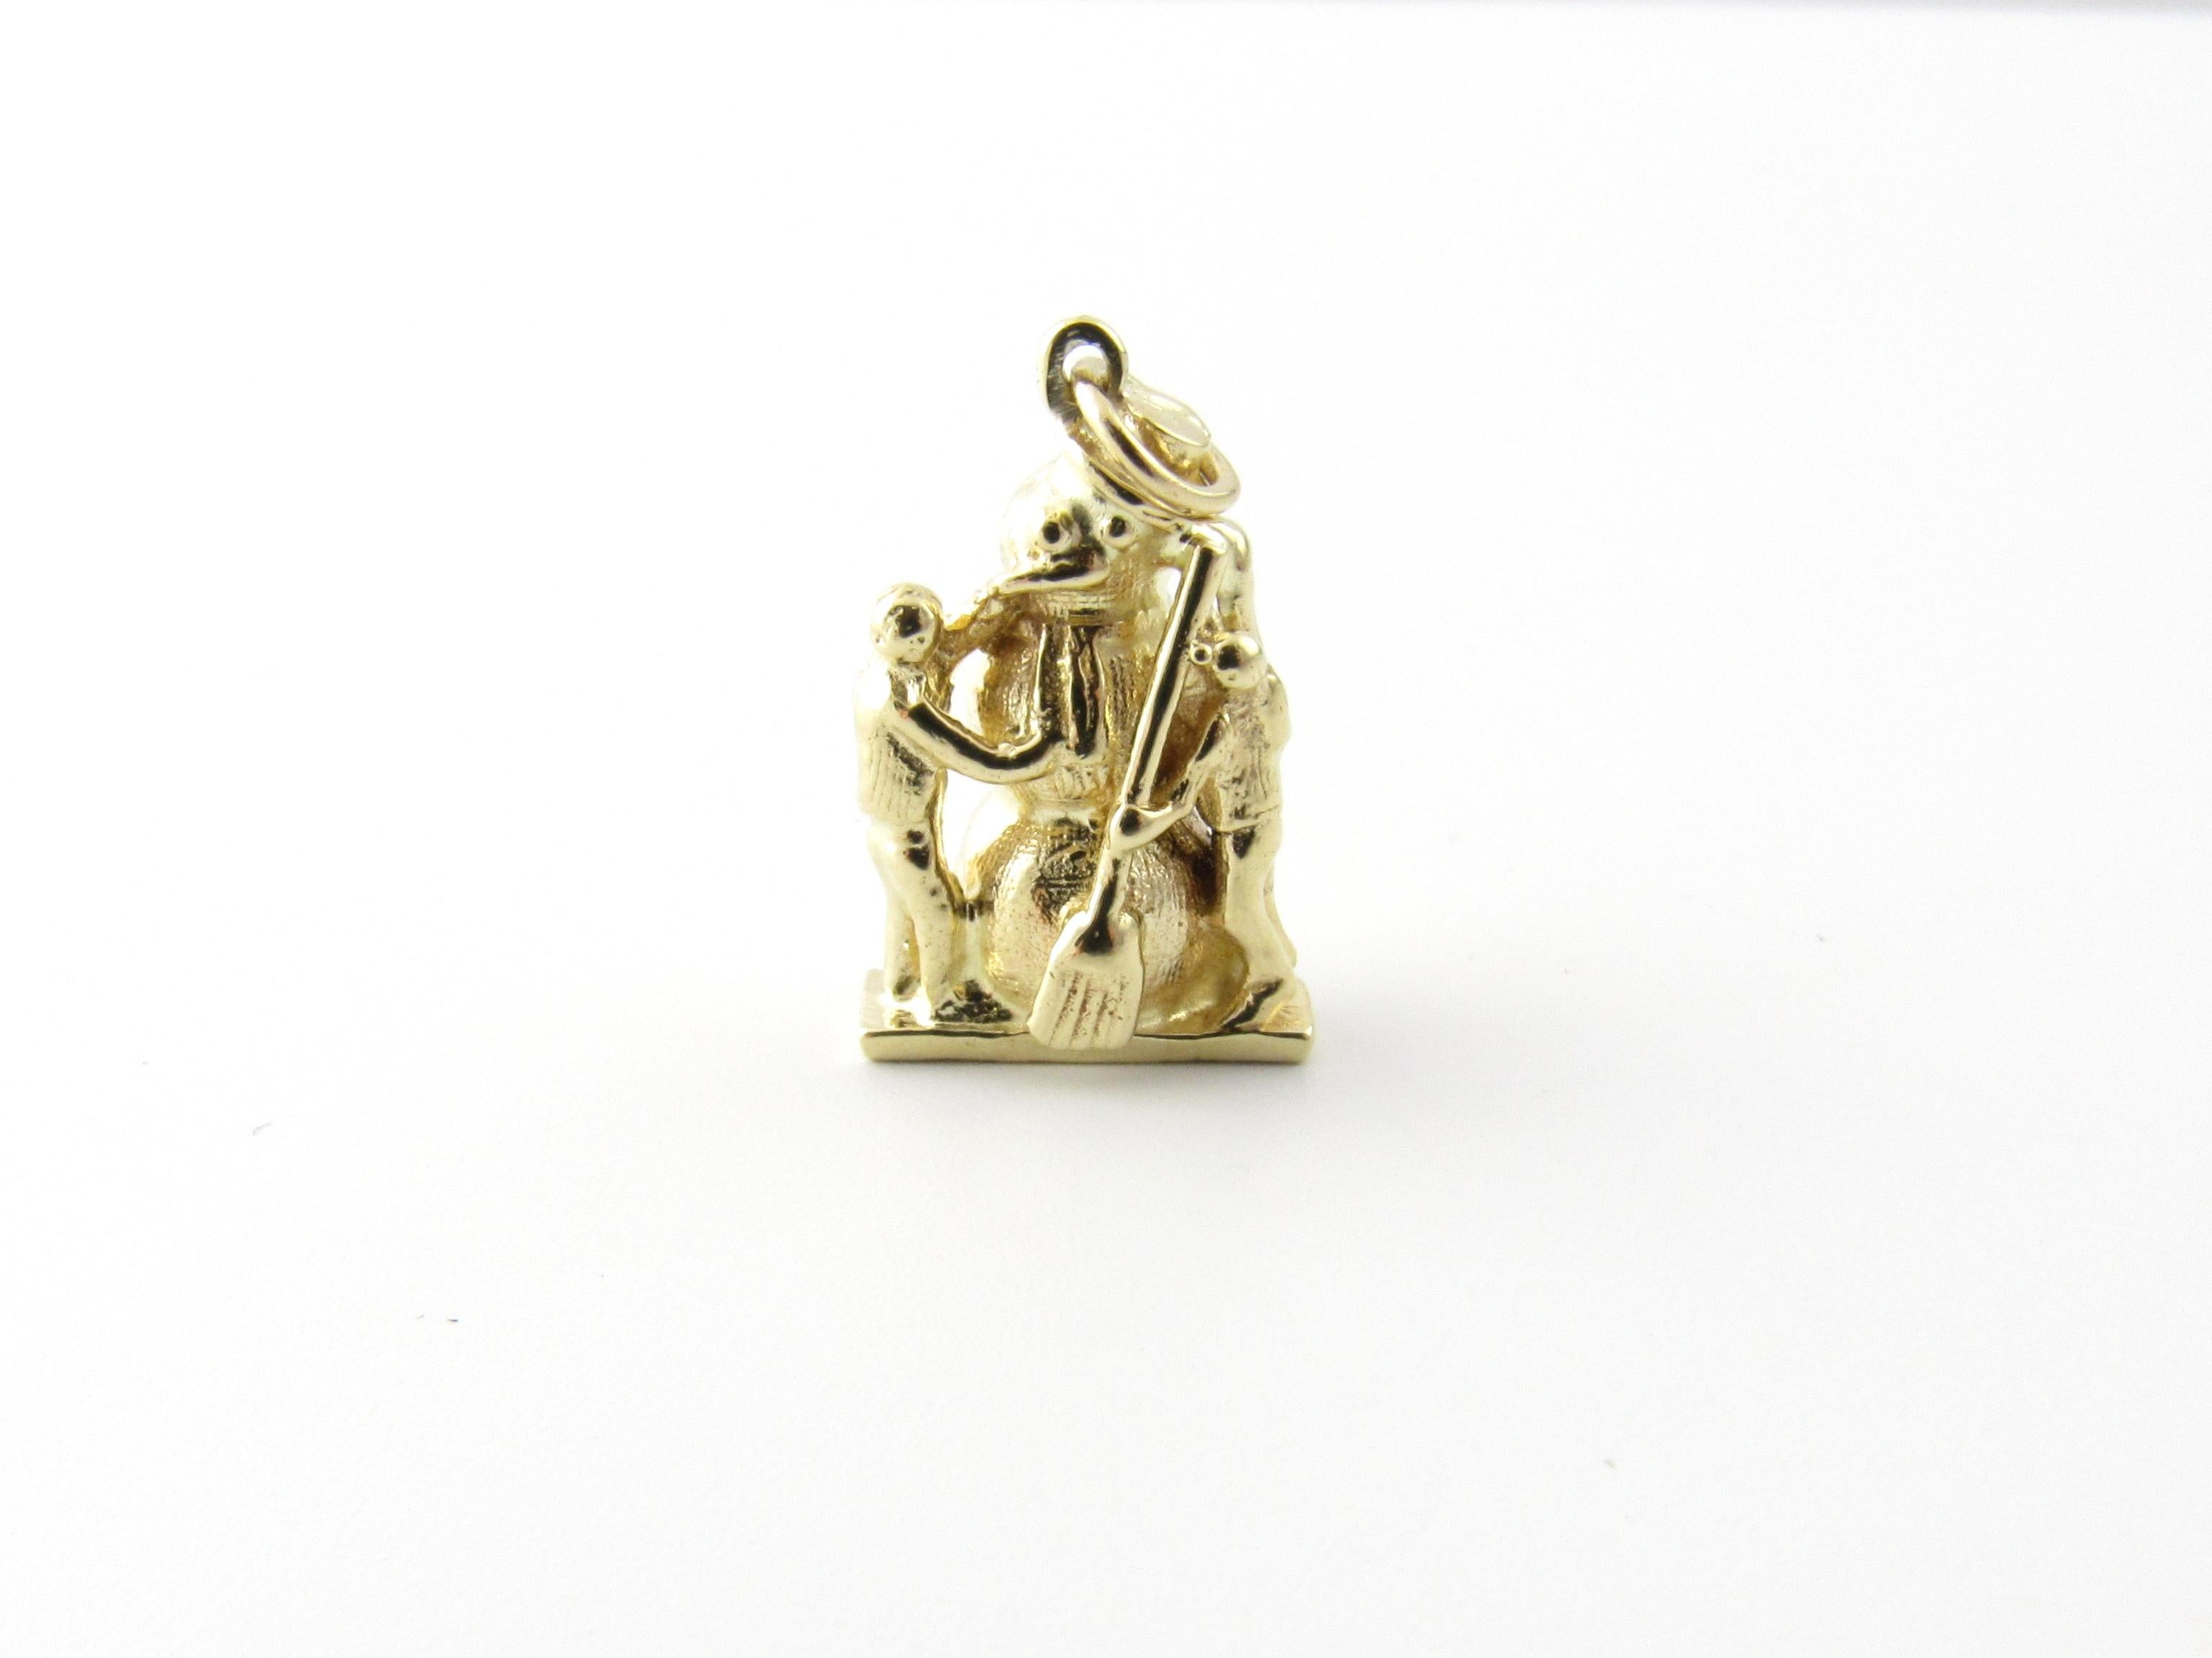 Vintage 14 Karat Yellow Gold Snowman Charm

Let it snow!

This lovely 3D charm features a wintry scene of two children building a snowman. Beautifully detailed in 14K yellow gold.

Size: 20 mm x 13 mm

Weight: 3.2 dwt. / 5.0 gr.

Stamped: 14K

Very